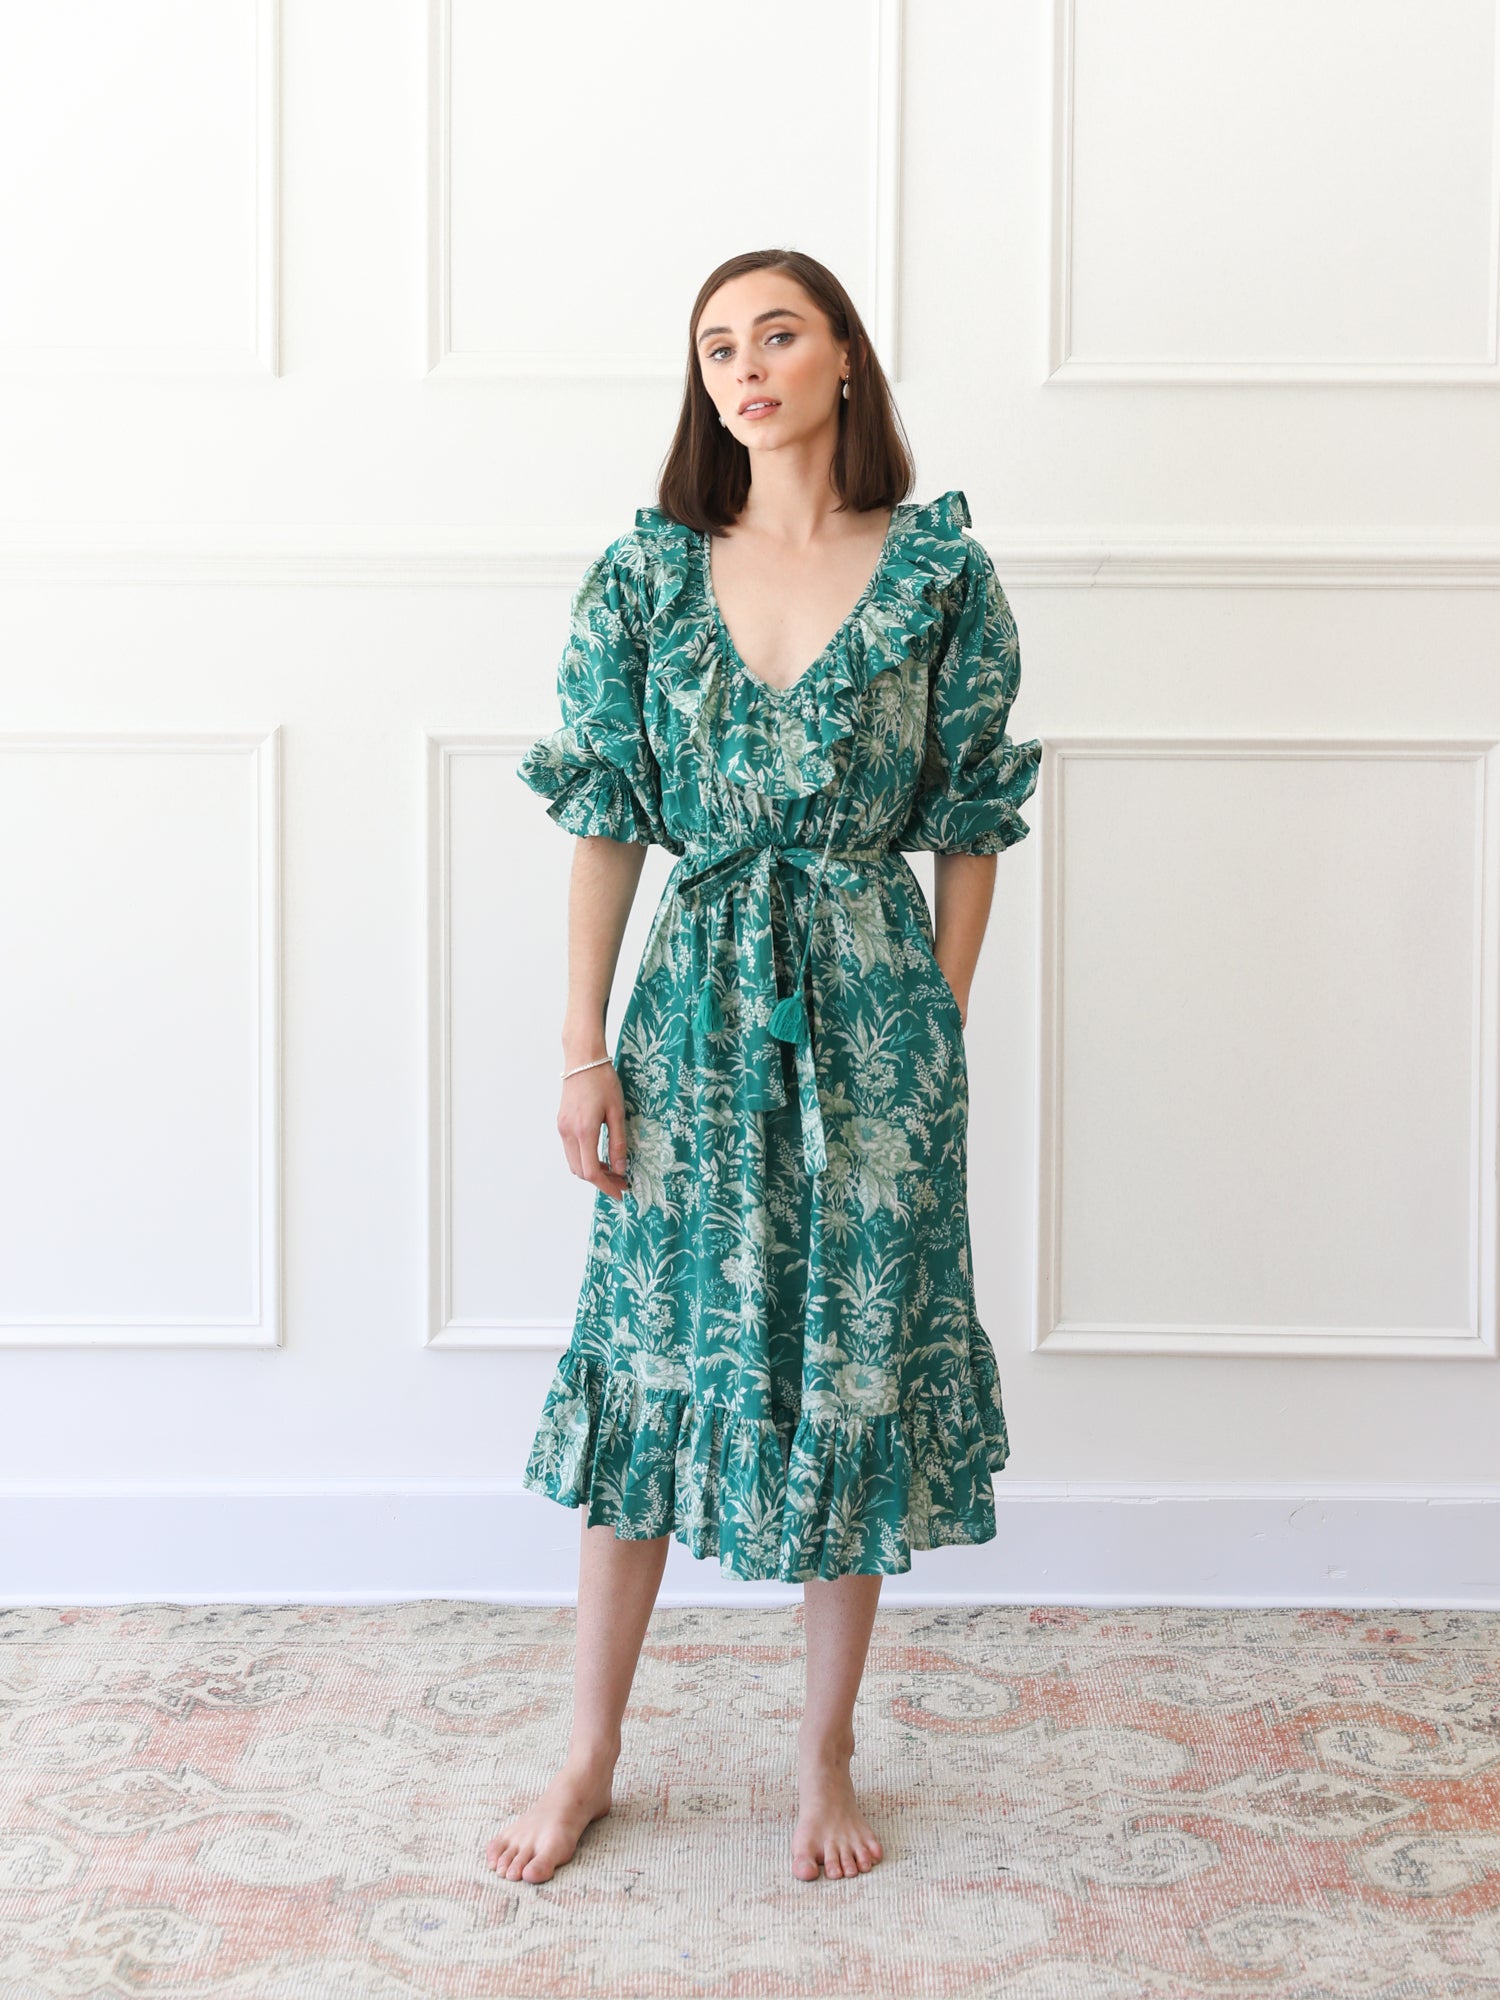 MILLE Clothing June Dress in Jade Paradise